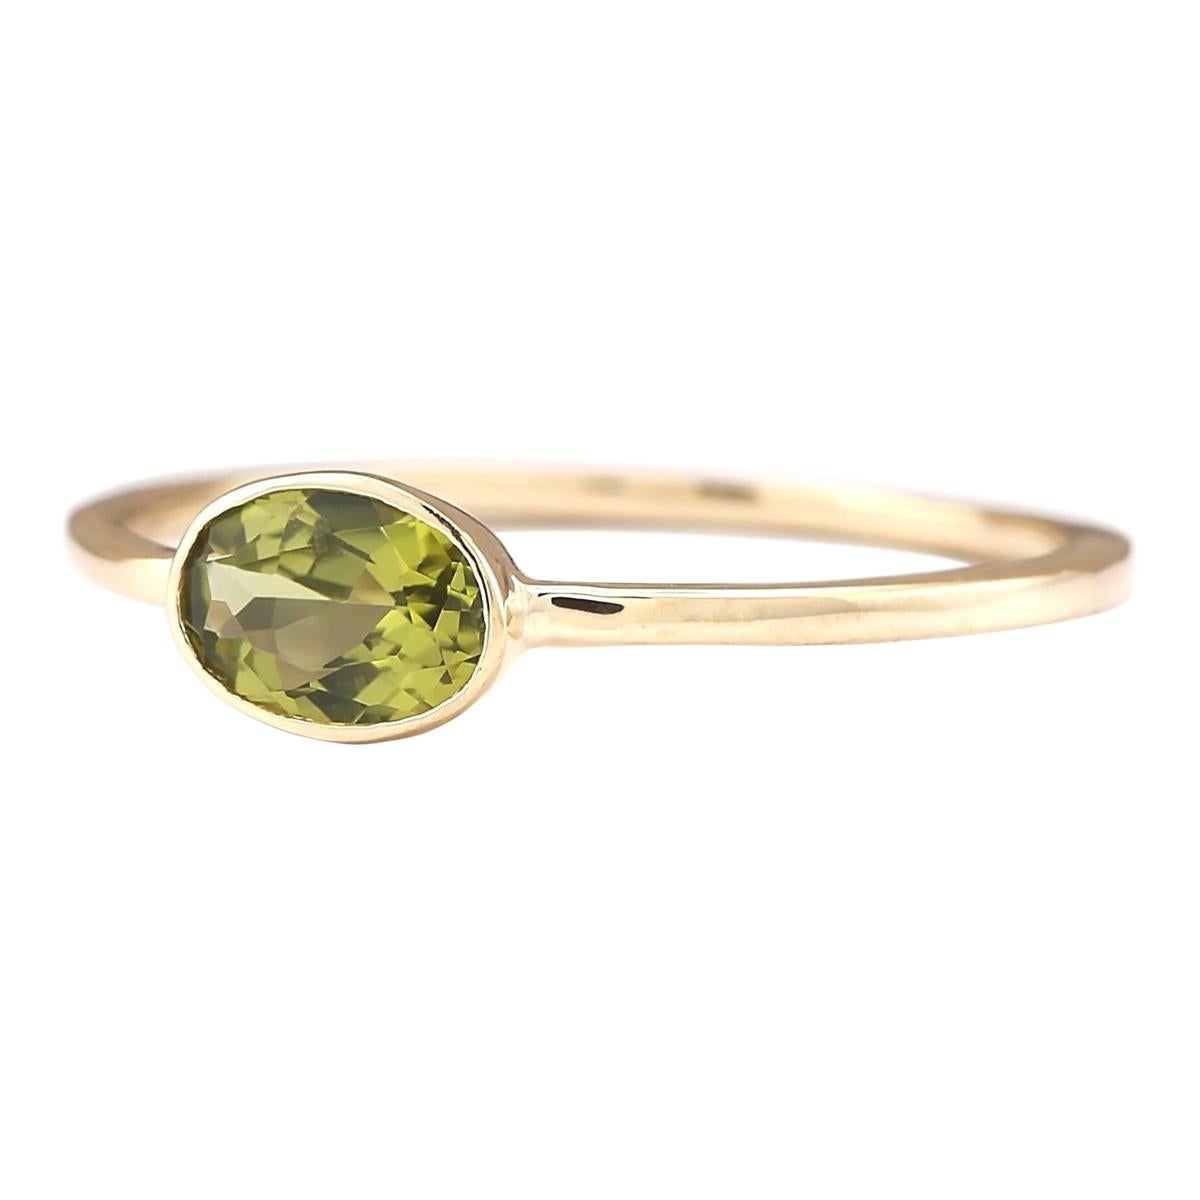 Introducing our exquisite 14 Karat Yellow Gold Ring featuring a stunning 0.60 Carat Natural Peridot gemstone. Stamped for authenticity, this ring weighs a mere 1.0 gram, ensuring comfort and wearability. The Peridot gemstone, boasting a weight of